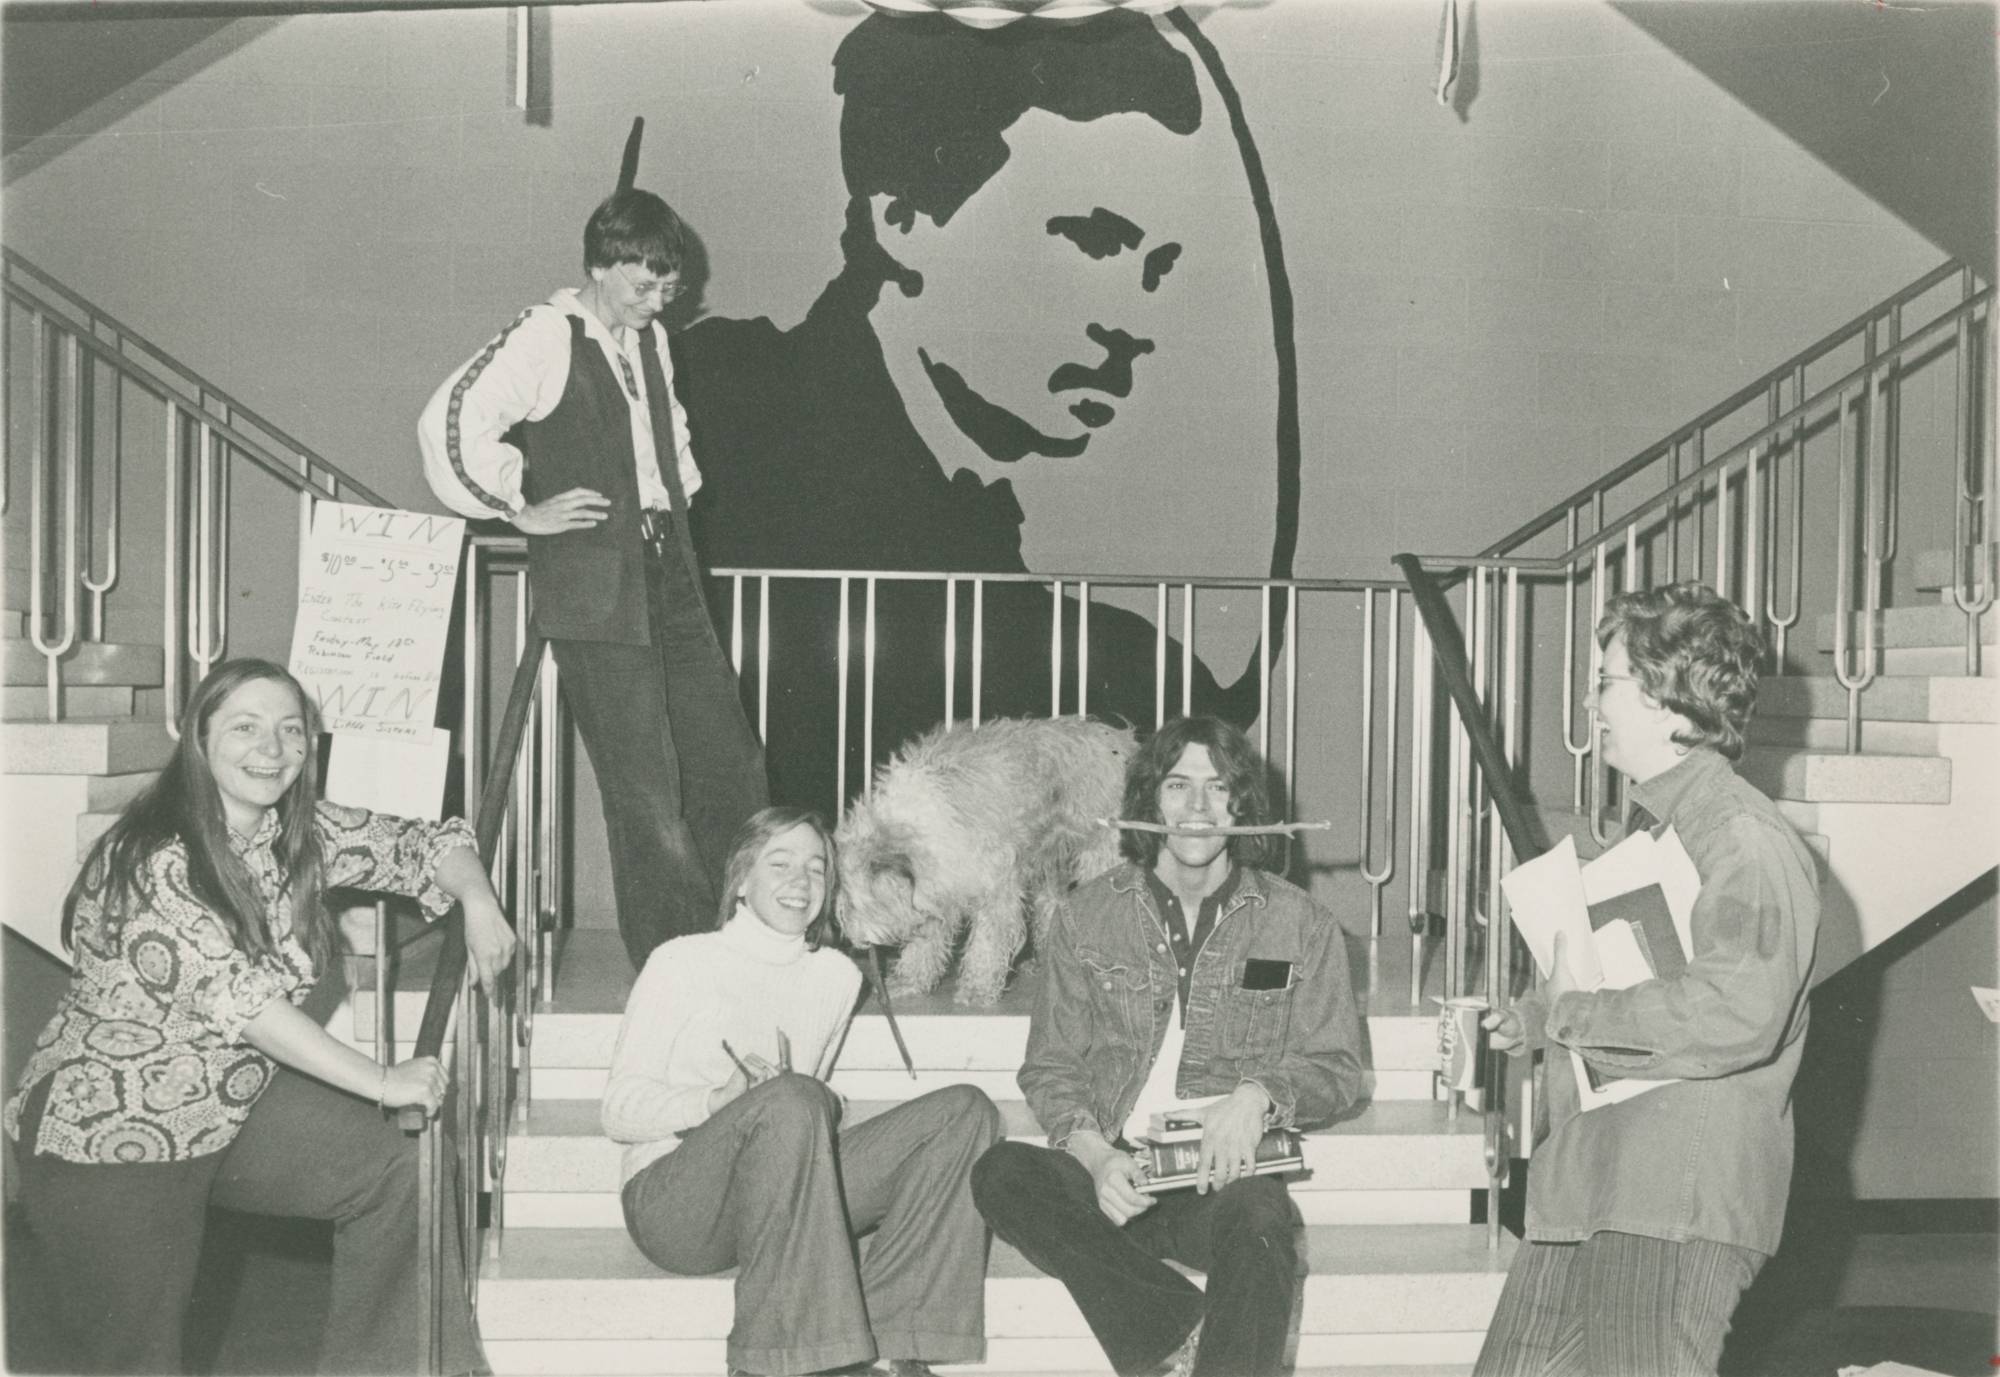 A black and white photo of students and faculty sitting and standing on the stairs in front of the William James mural in Lake Superior Hall.